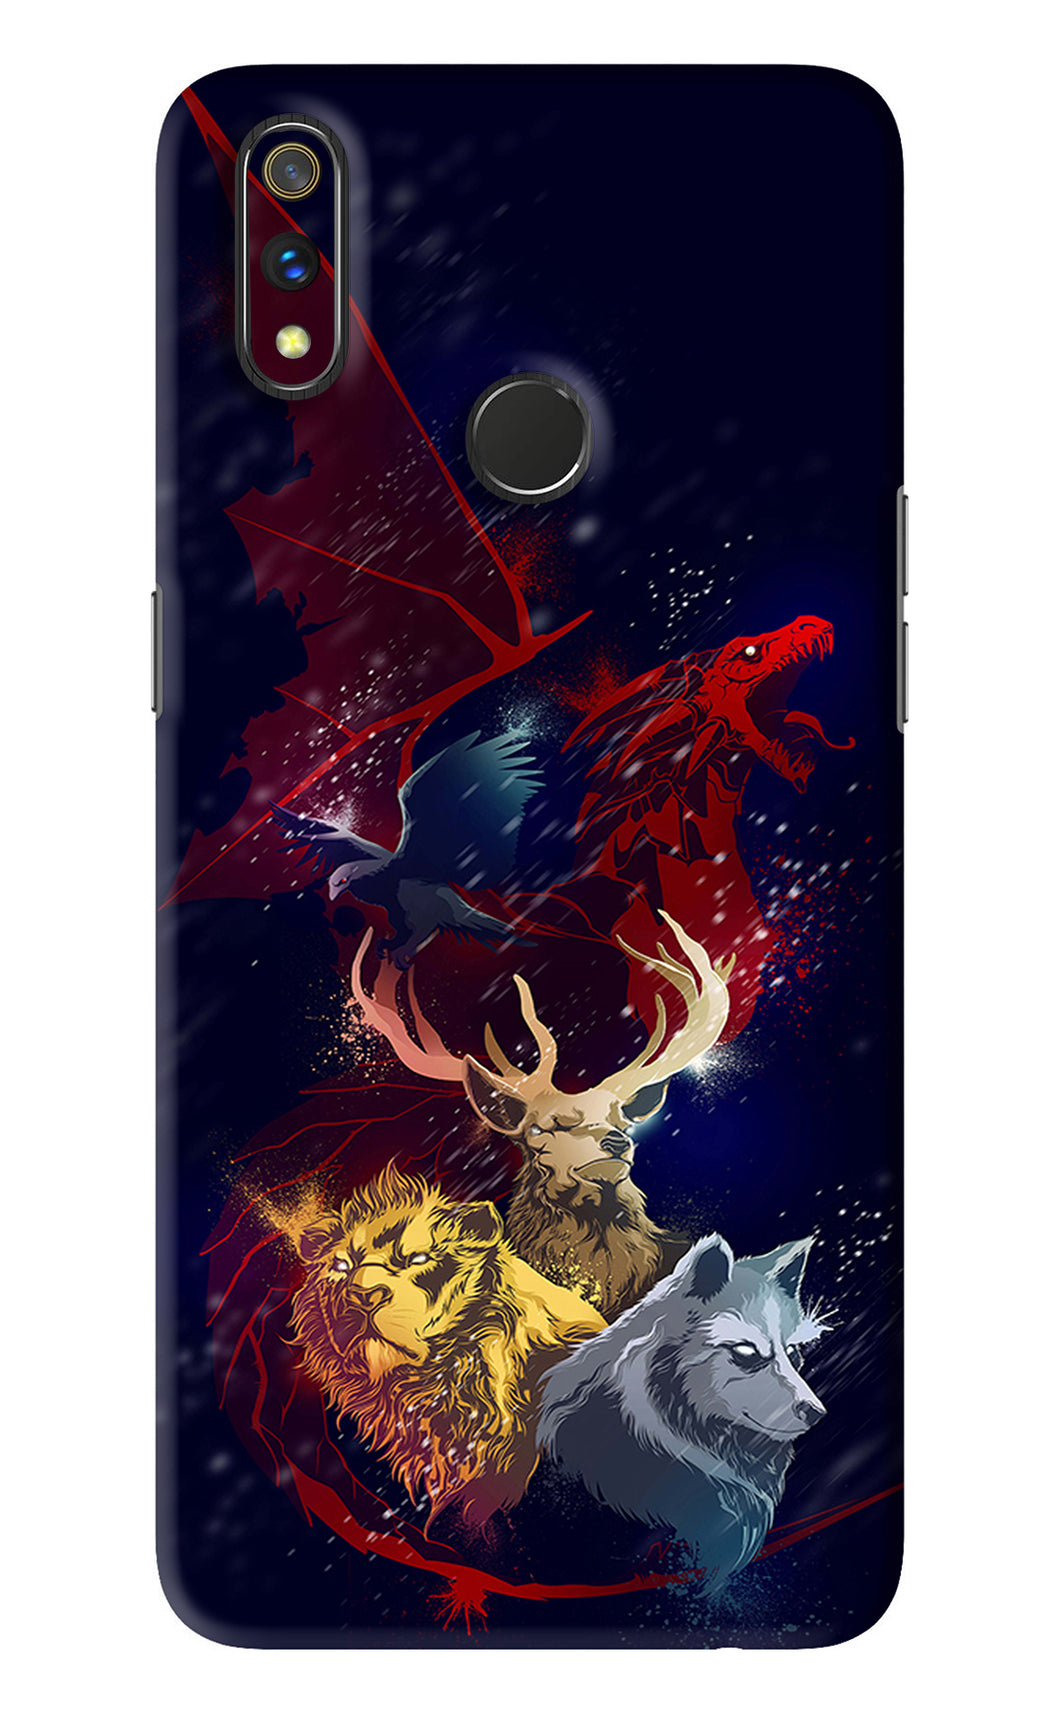 Game Of Thrones Realme 3 Pro Back Skin Wrap